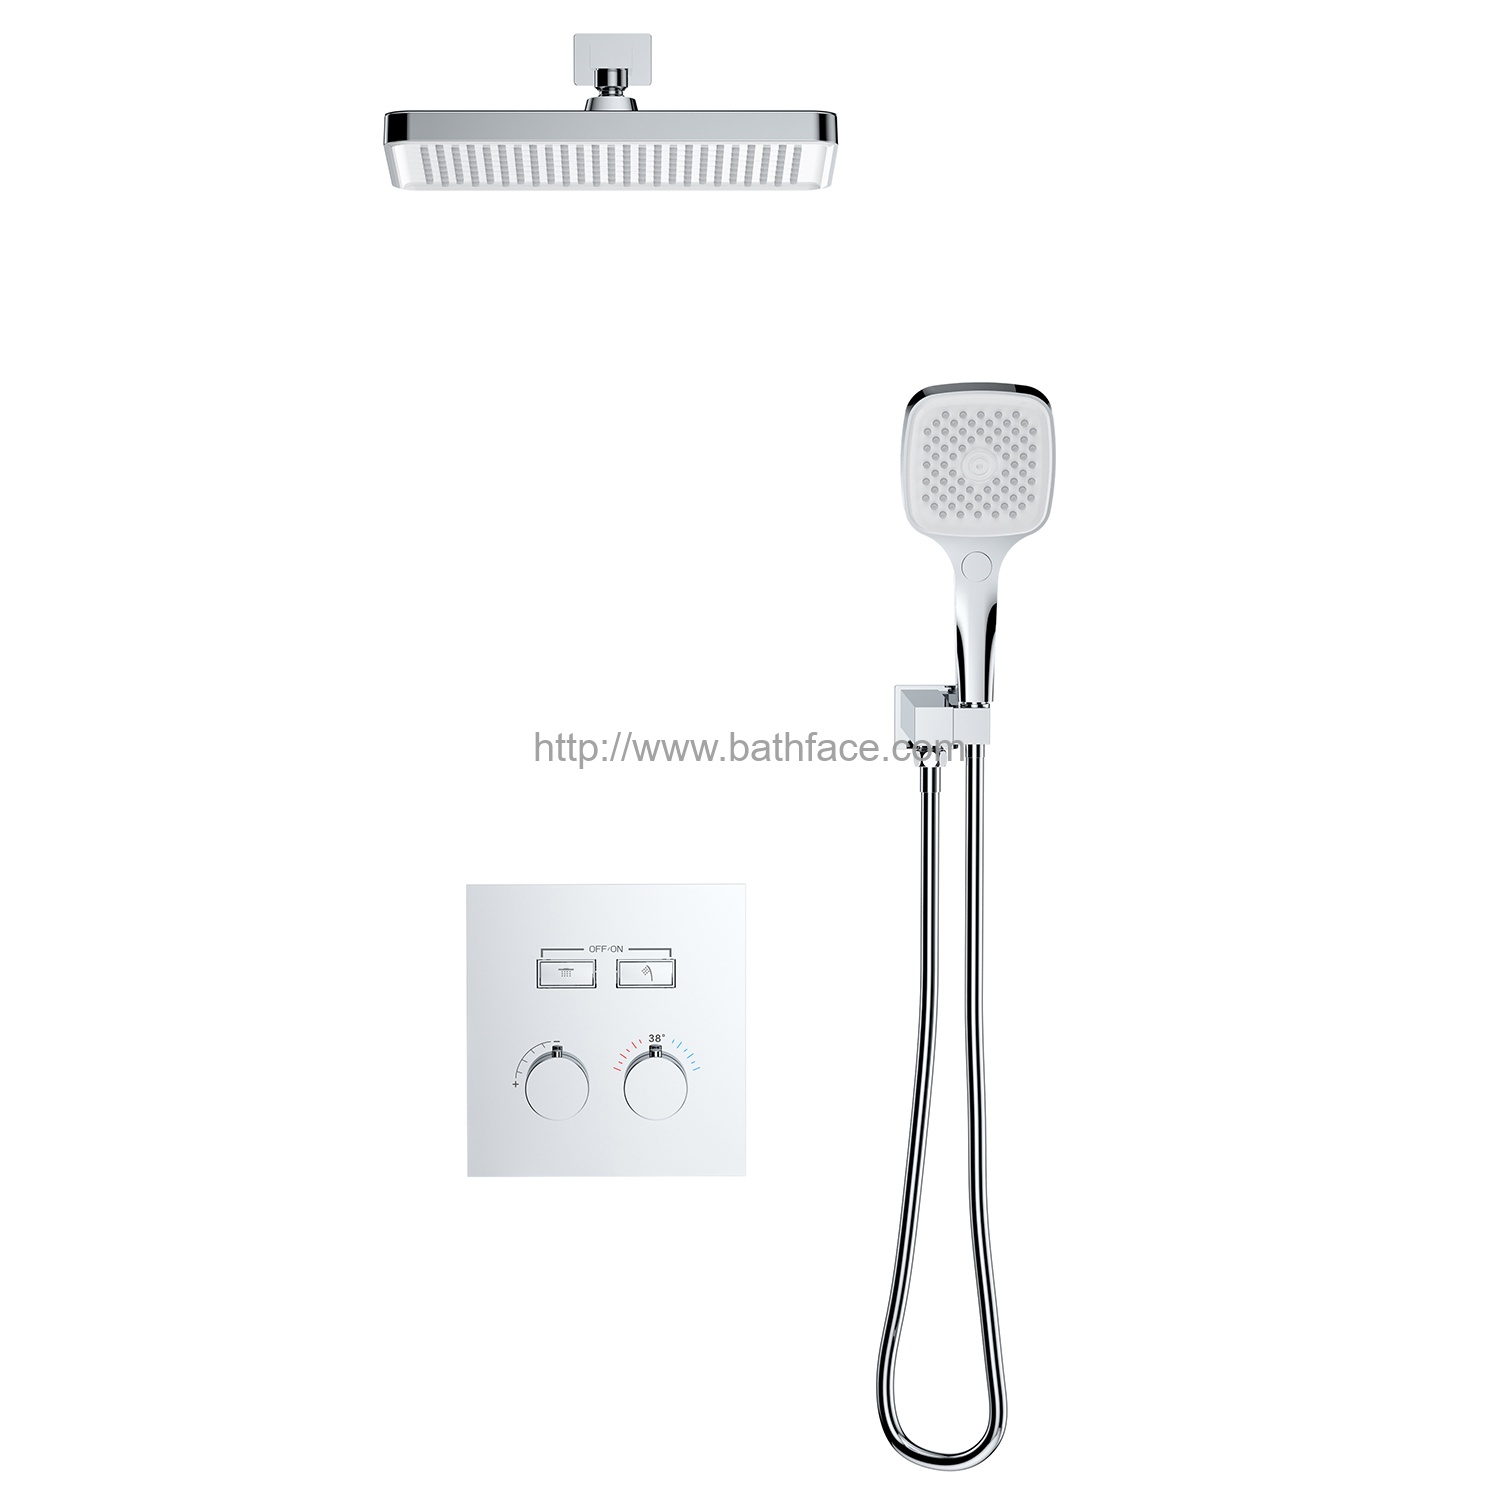 Flow Rate Ajustable 2 Select Thermostatic Shower